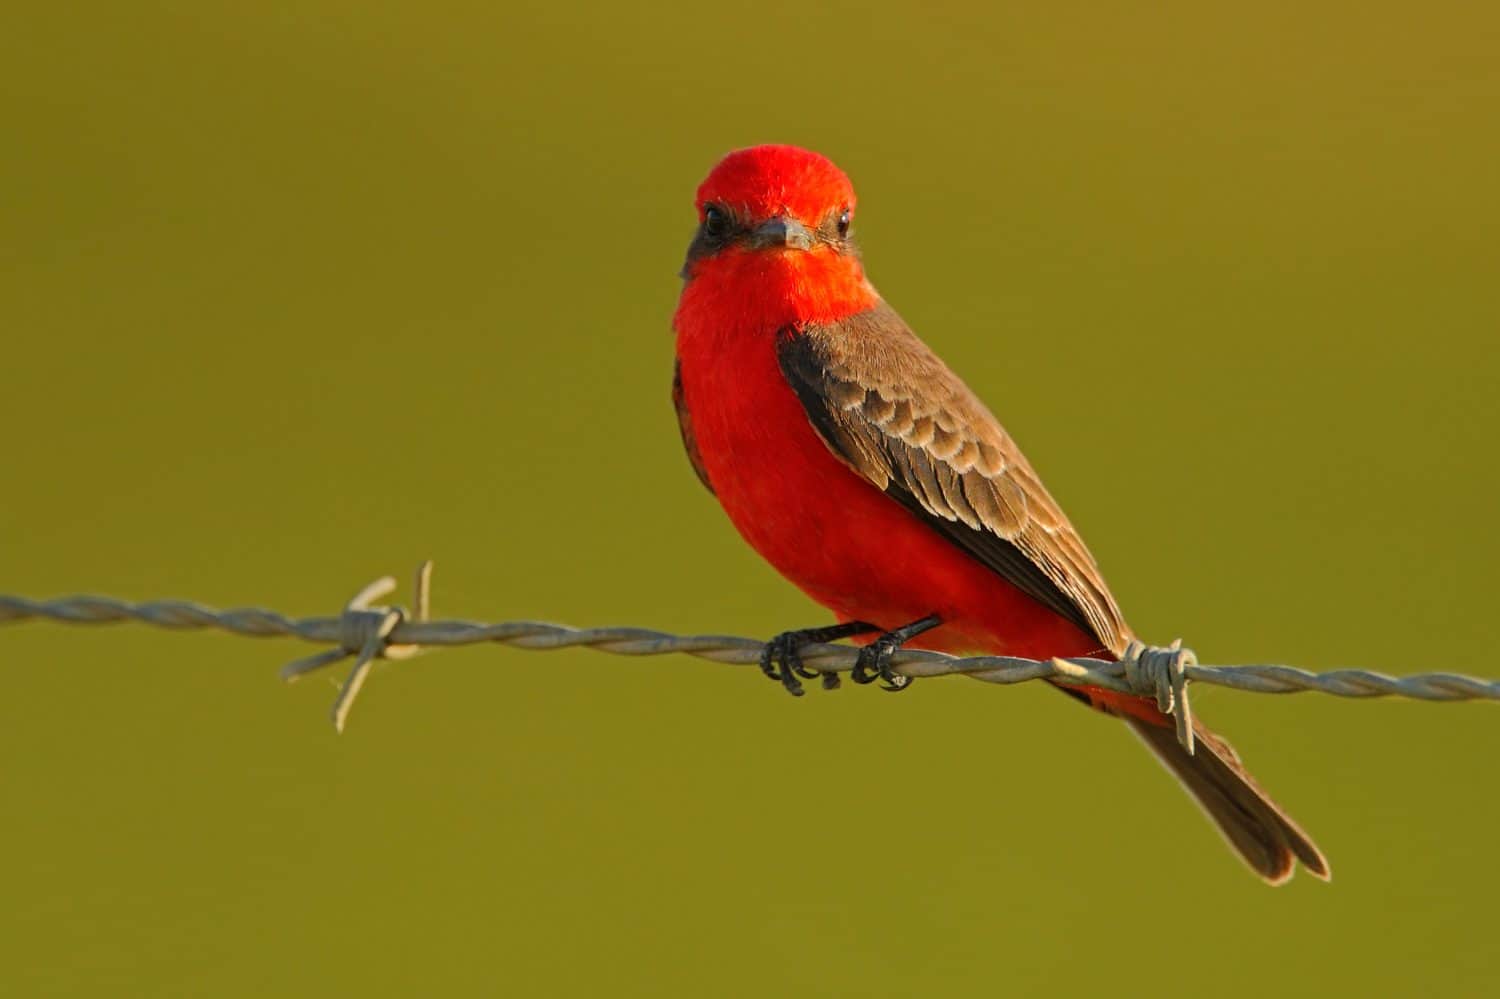 Vermilion Flycatcher, Pyrocephalus rubinus, beautiful red bird, sitting on the barbed wire with clear green background. Red bird in nature habitat.